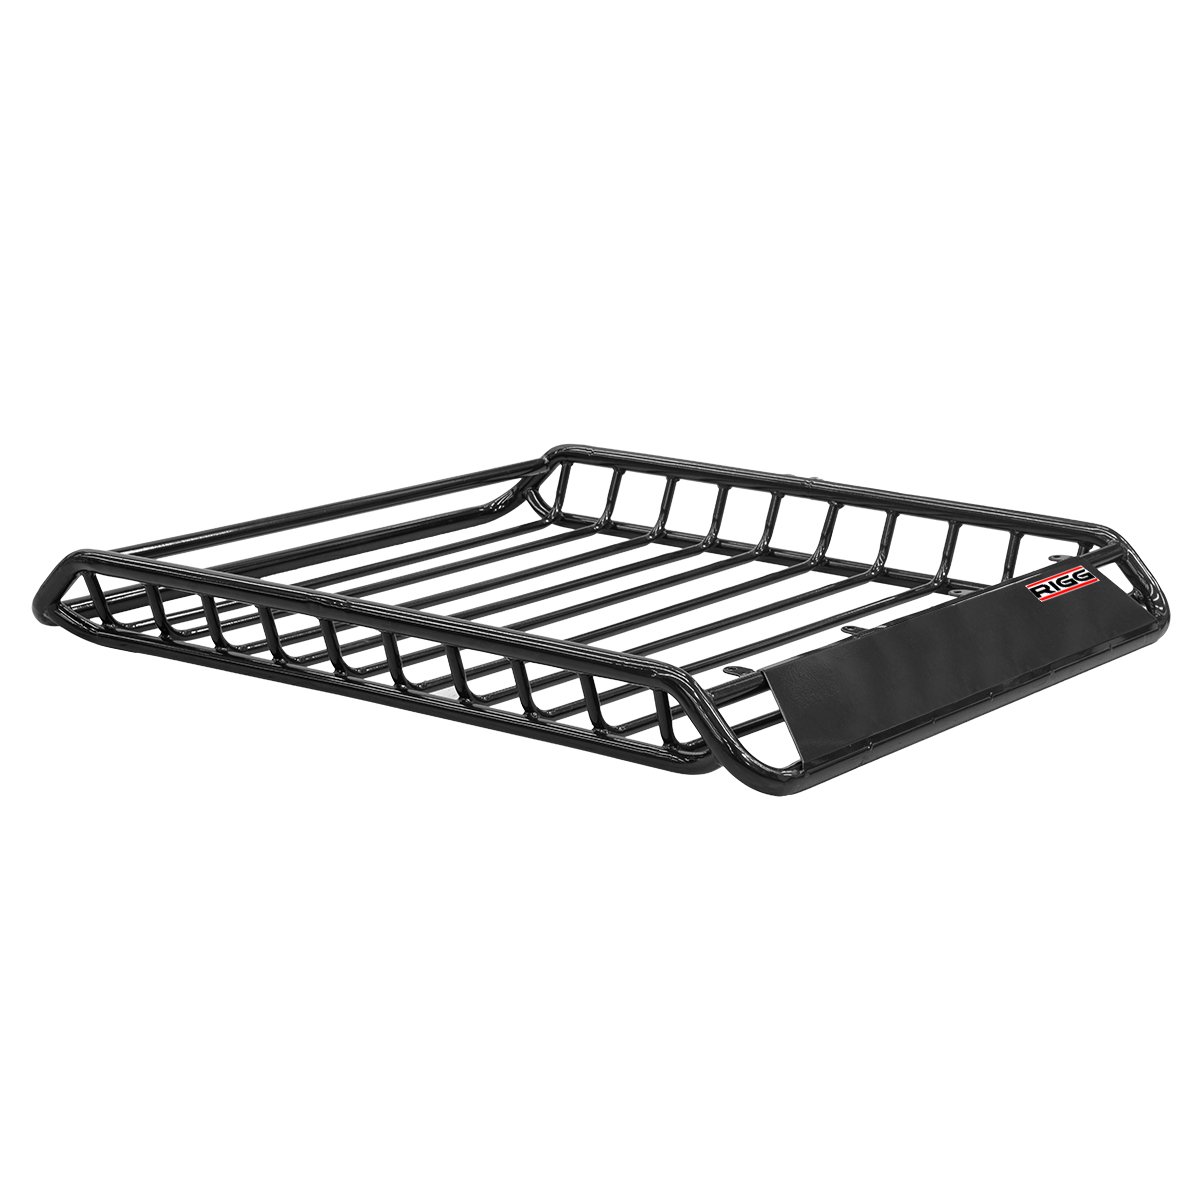 RIGG Universal Car Roof Rack Cage Cargo Carrier 2